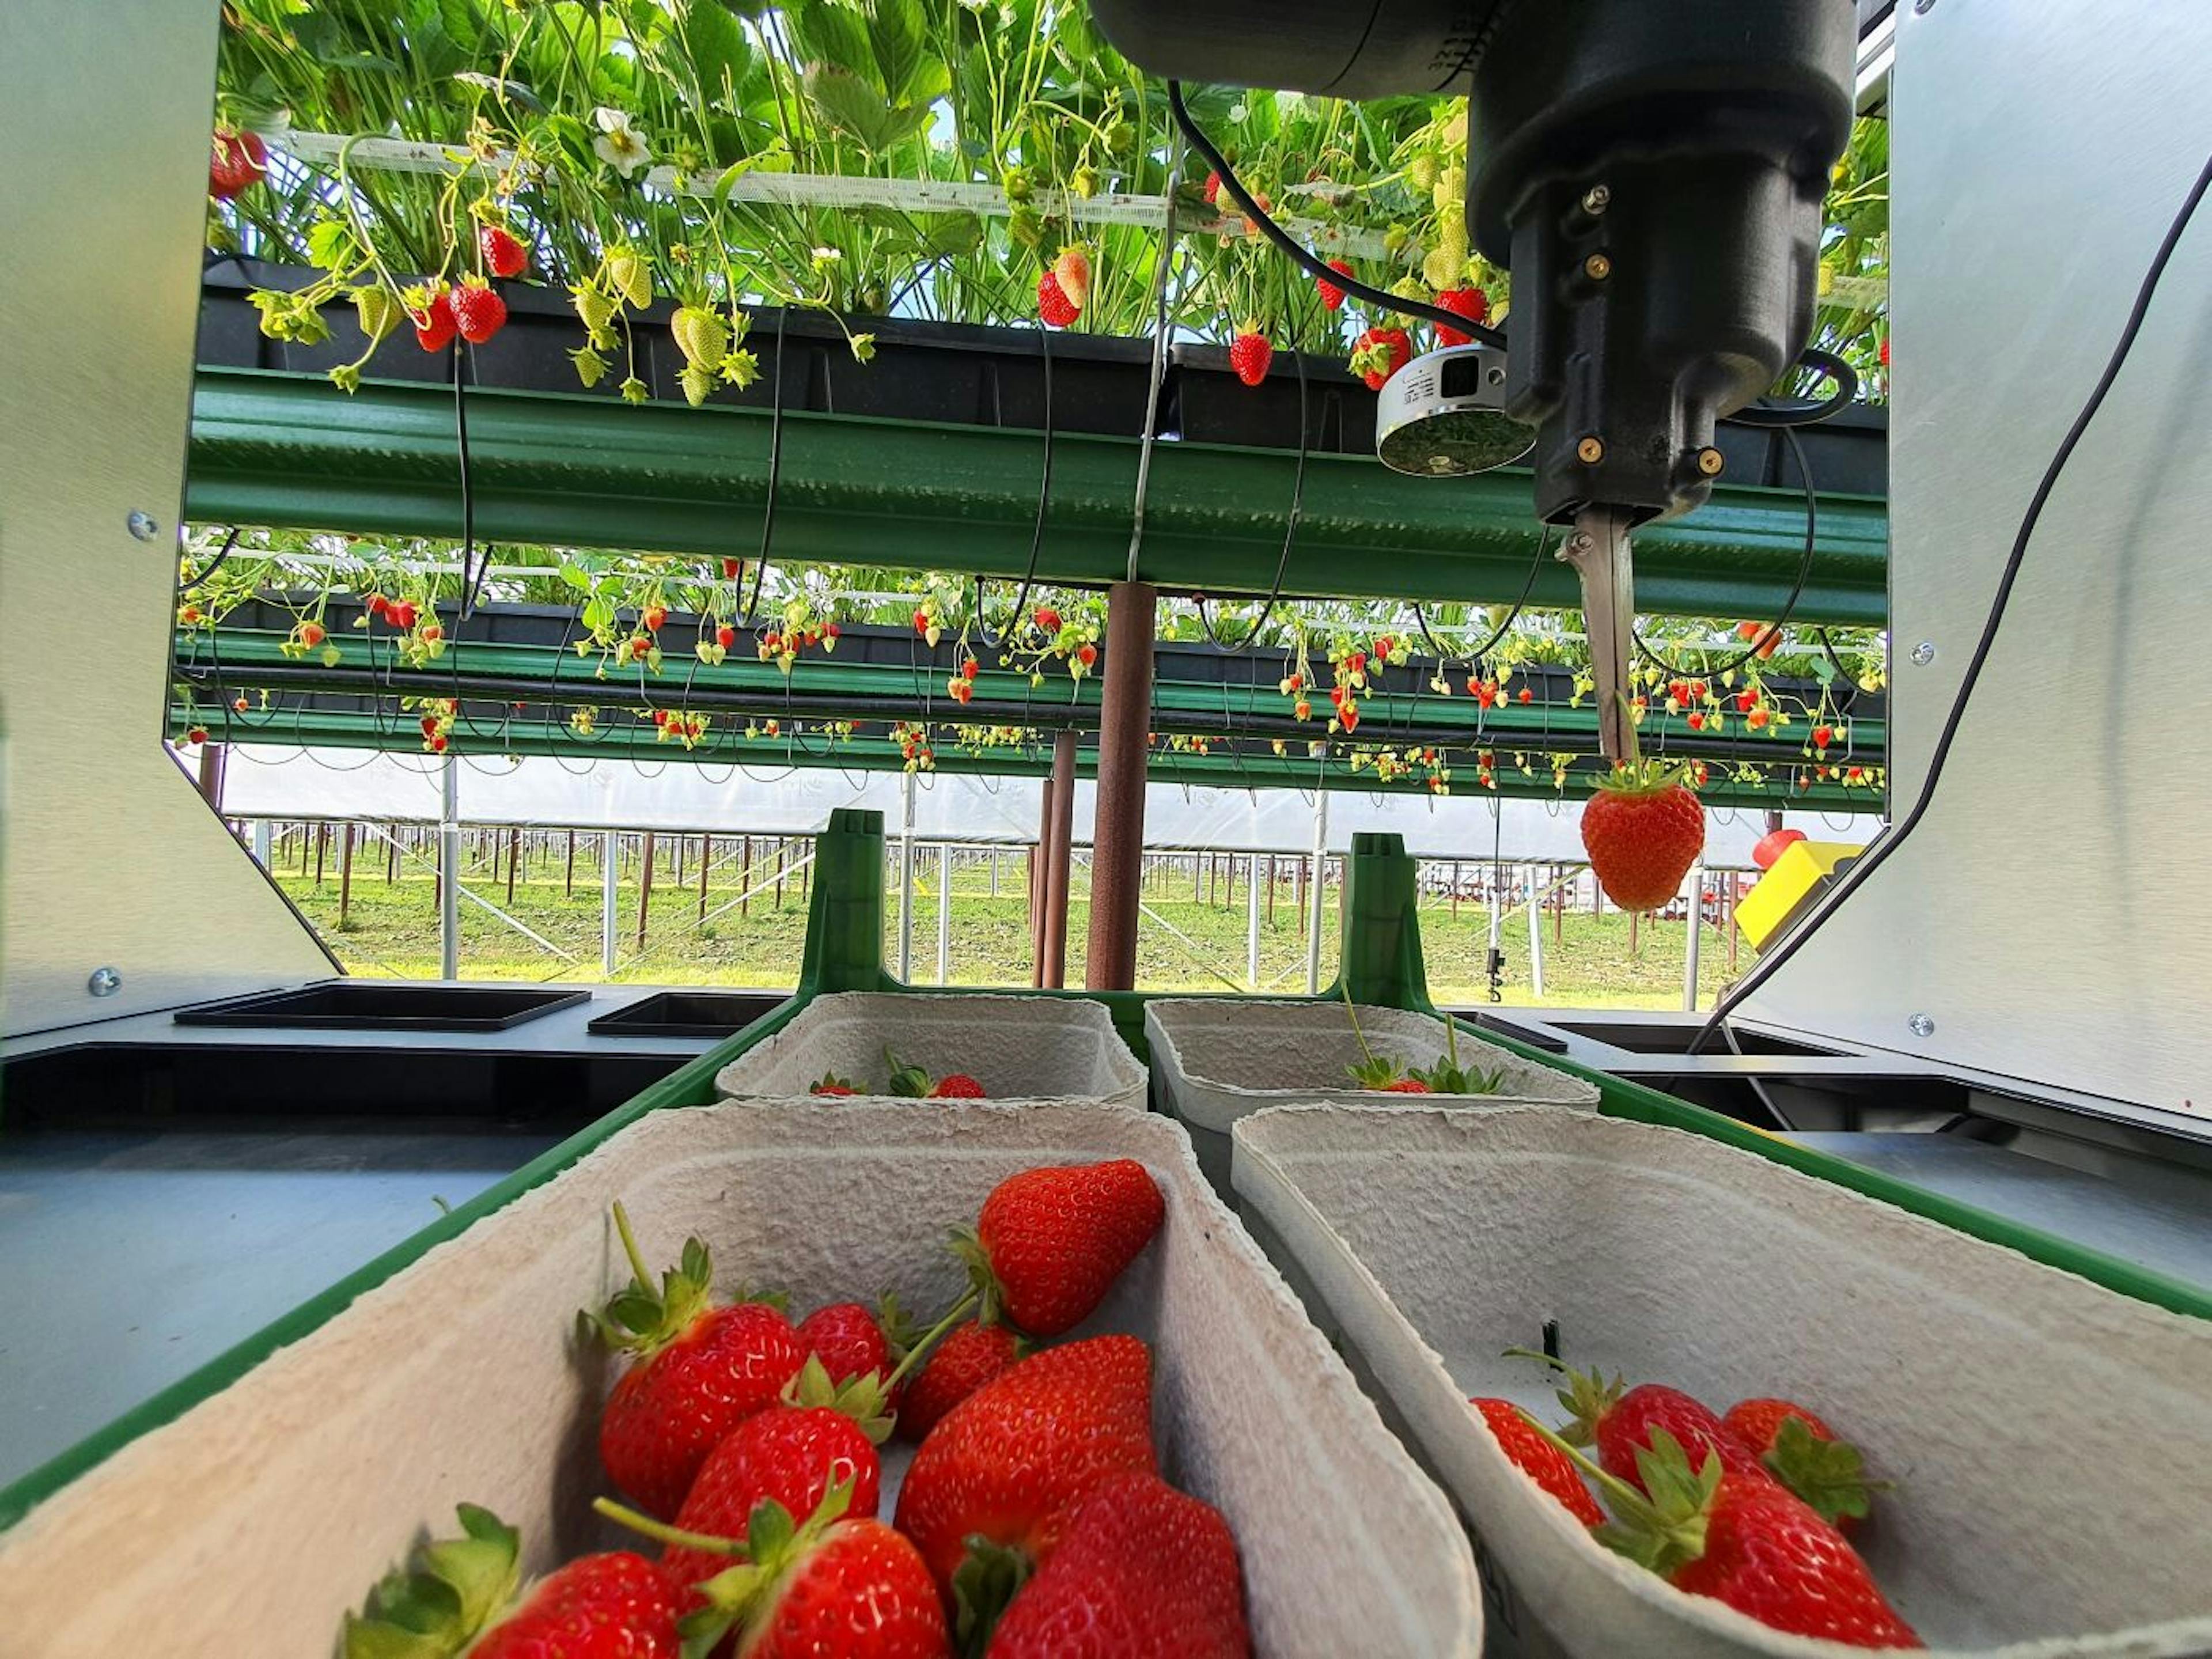 Robotic arm packaging strawberries right into their packages.